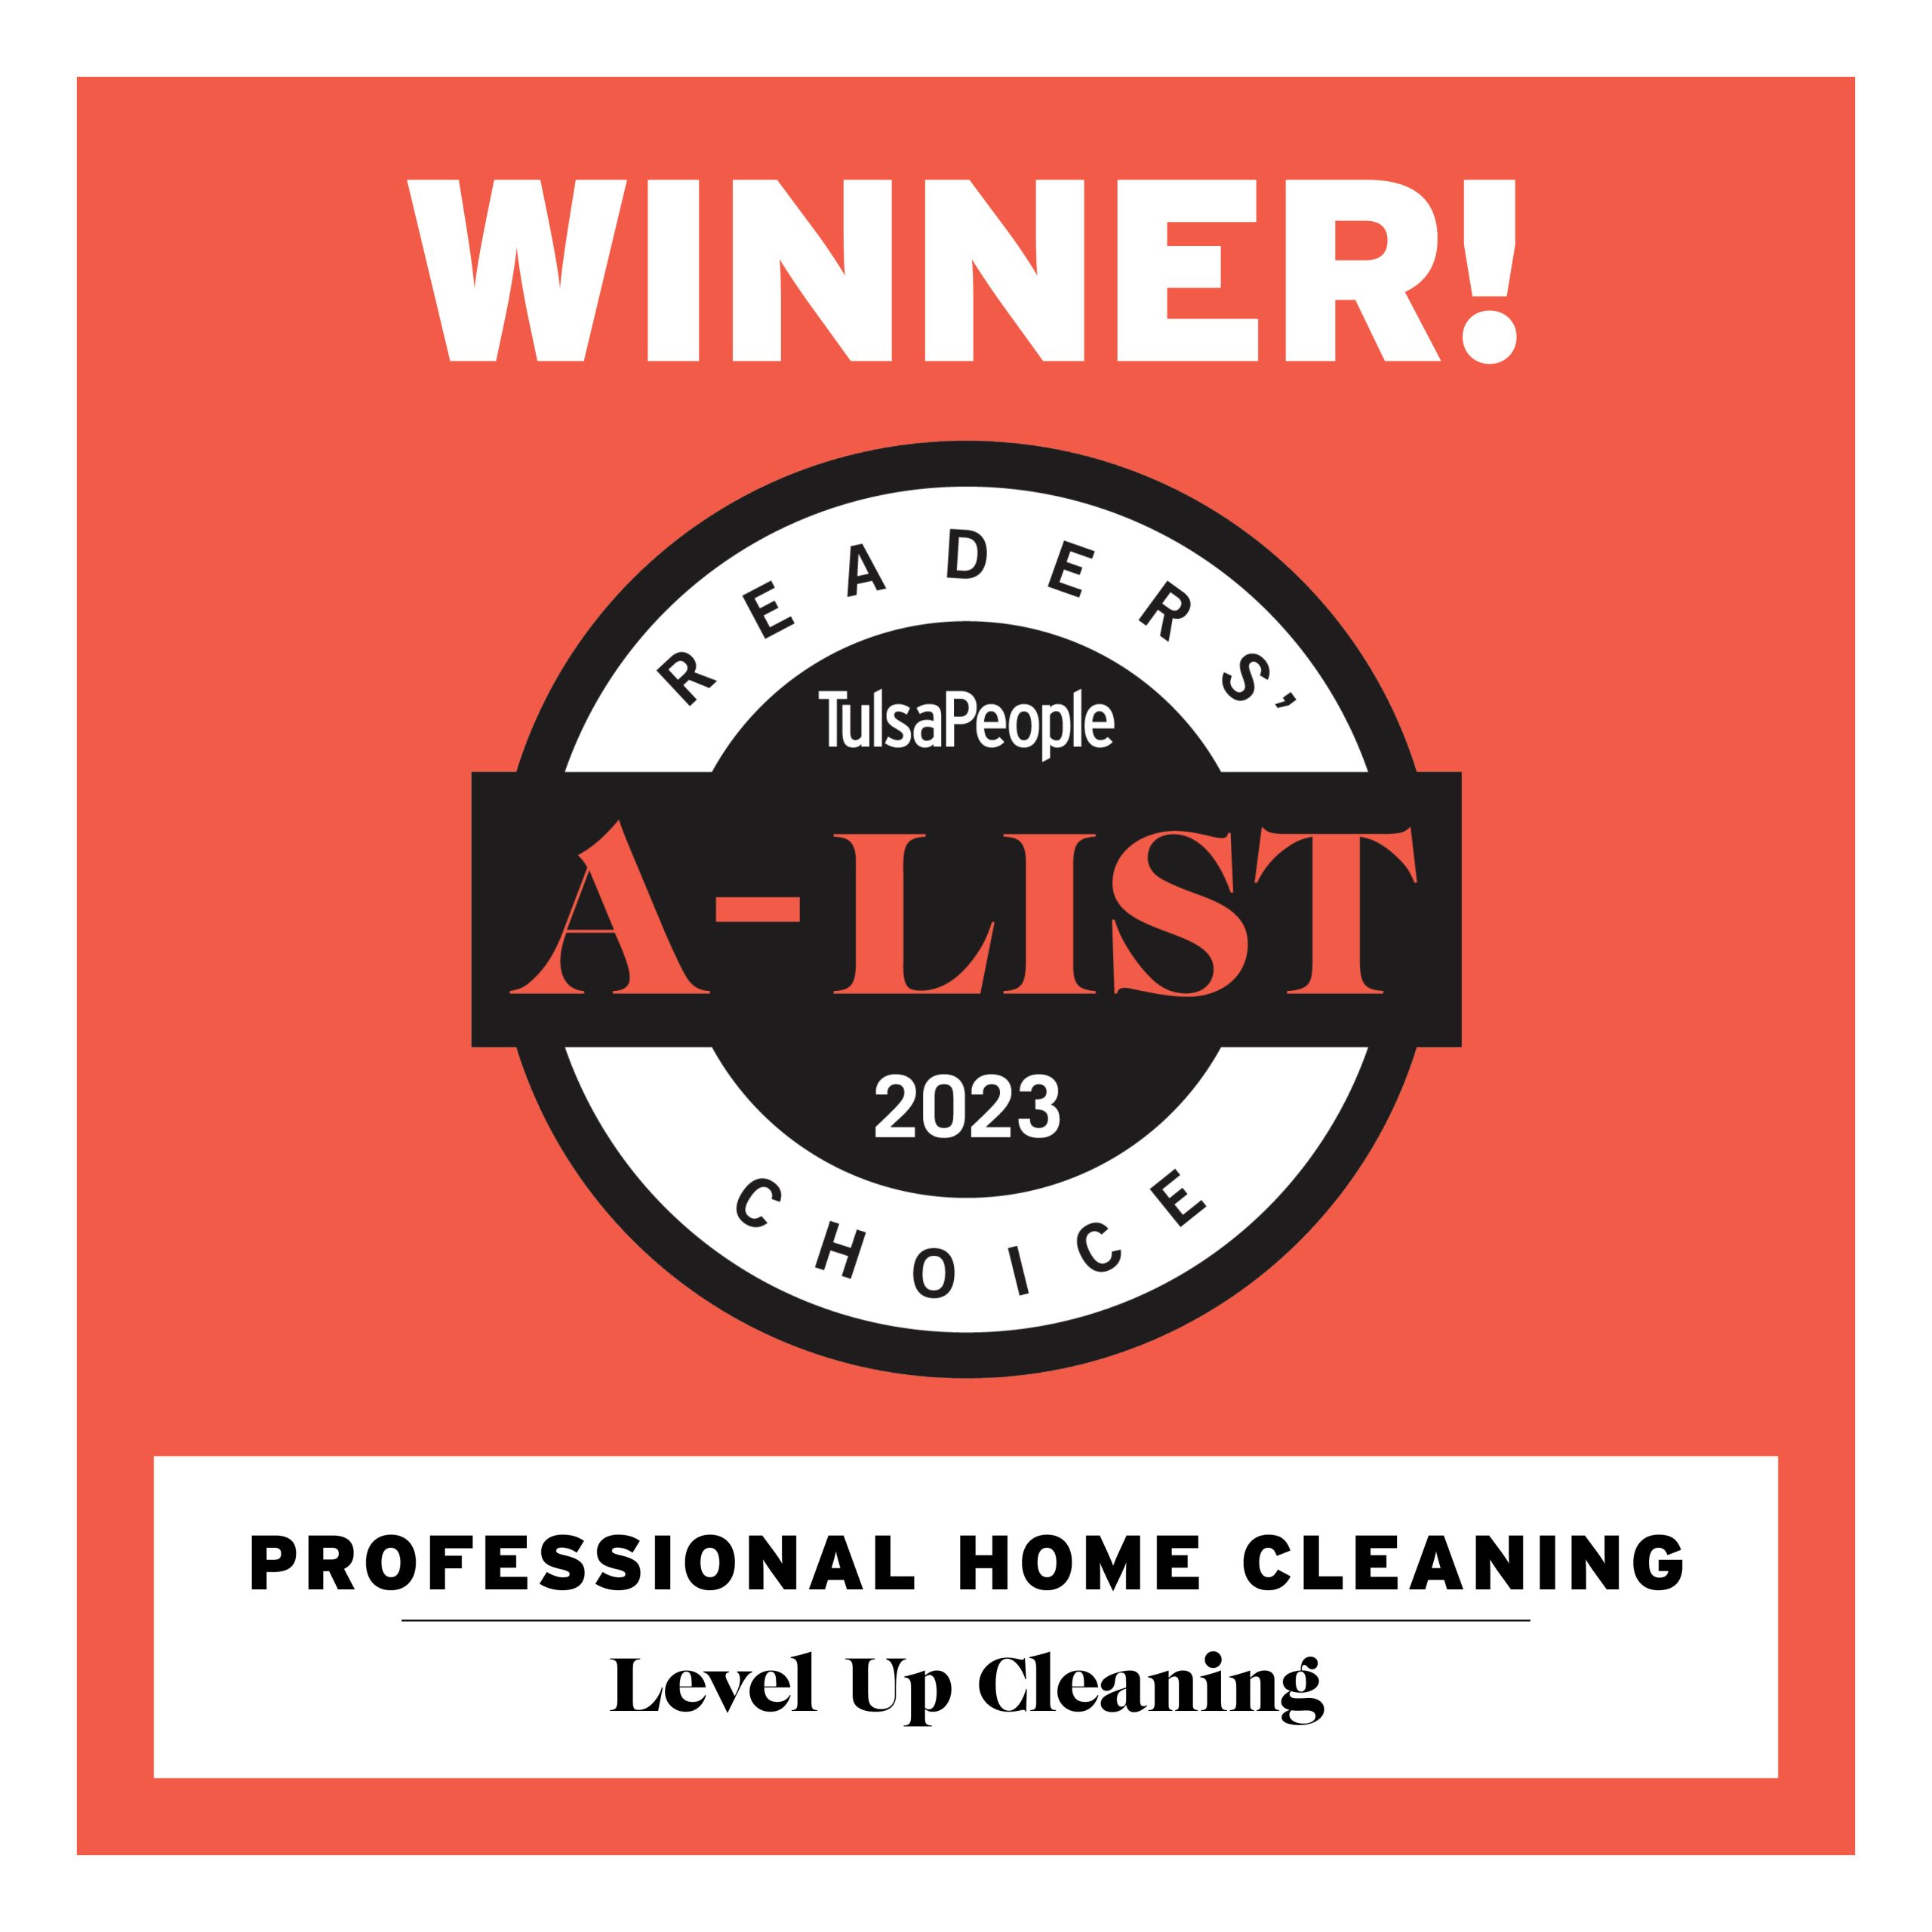 Professional Home Cleaning – Level Up Cleaning